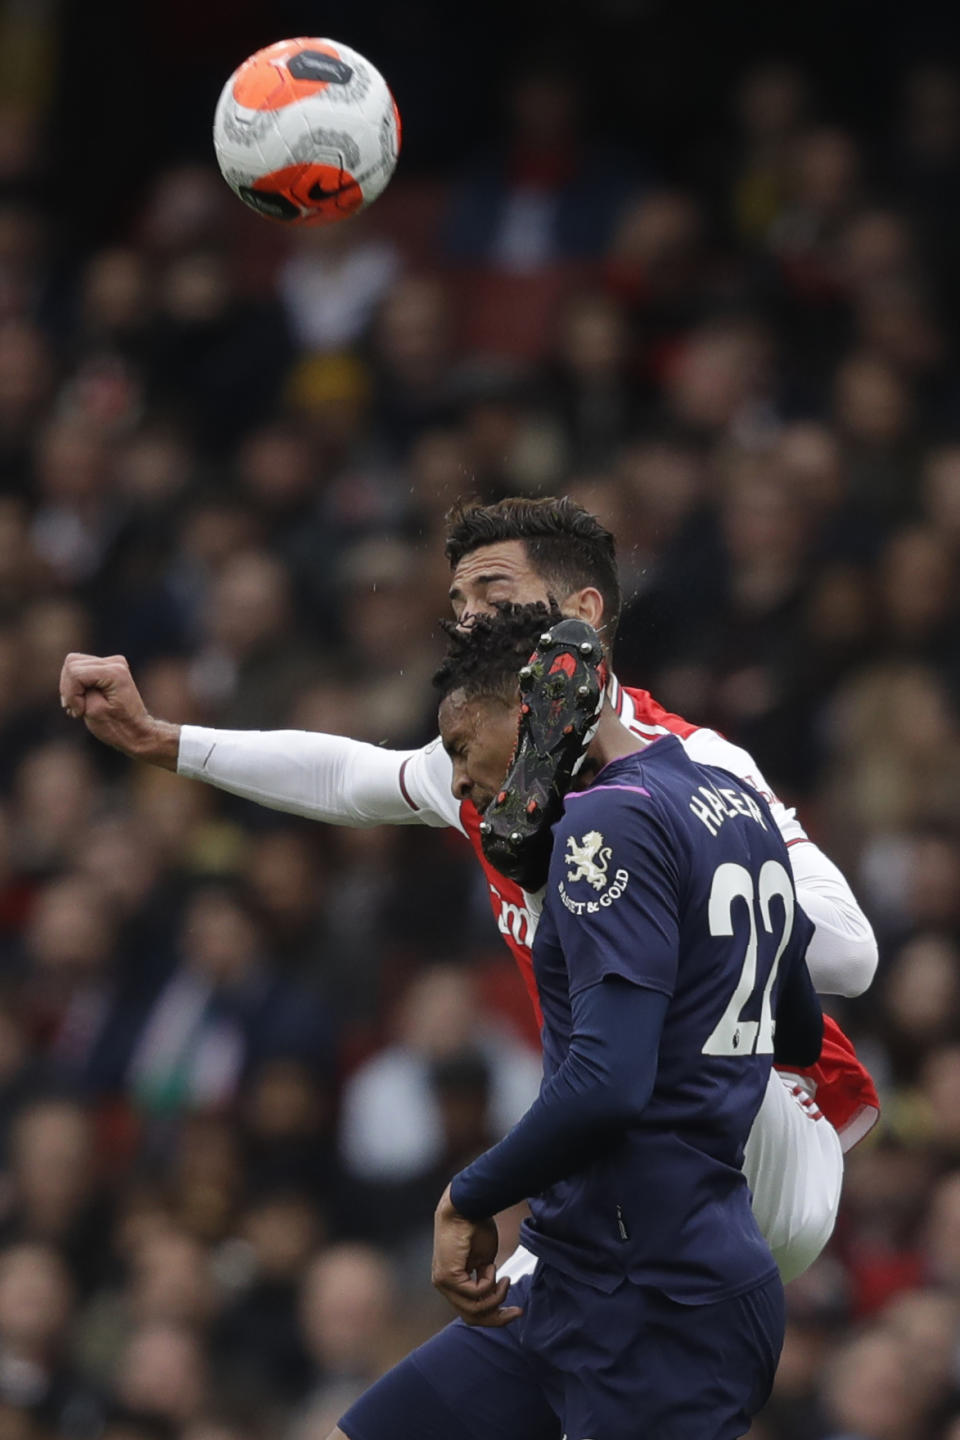 Arsenal's Pablo Mari, back, jumps for the ball with West Ham's Sebastien Haller during the Premier League soccer match between Arsenal and West Ham at the Emirates Stadium in London, Saturday, March 7, 2020.(AP Photo/Matt Dunham)